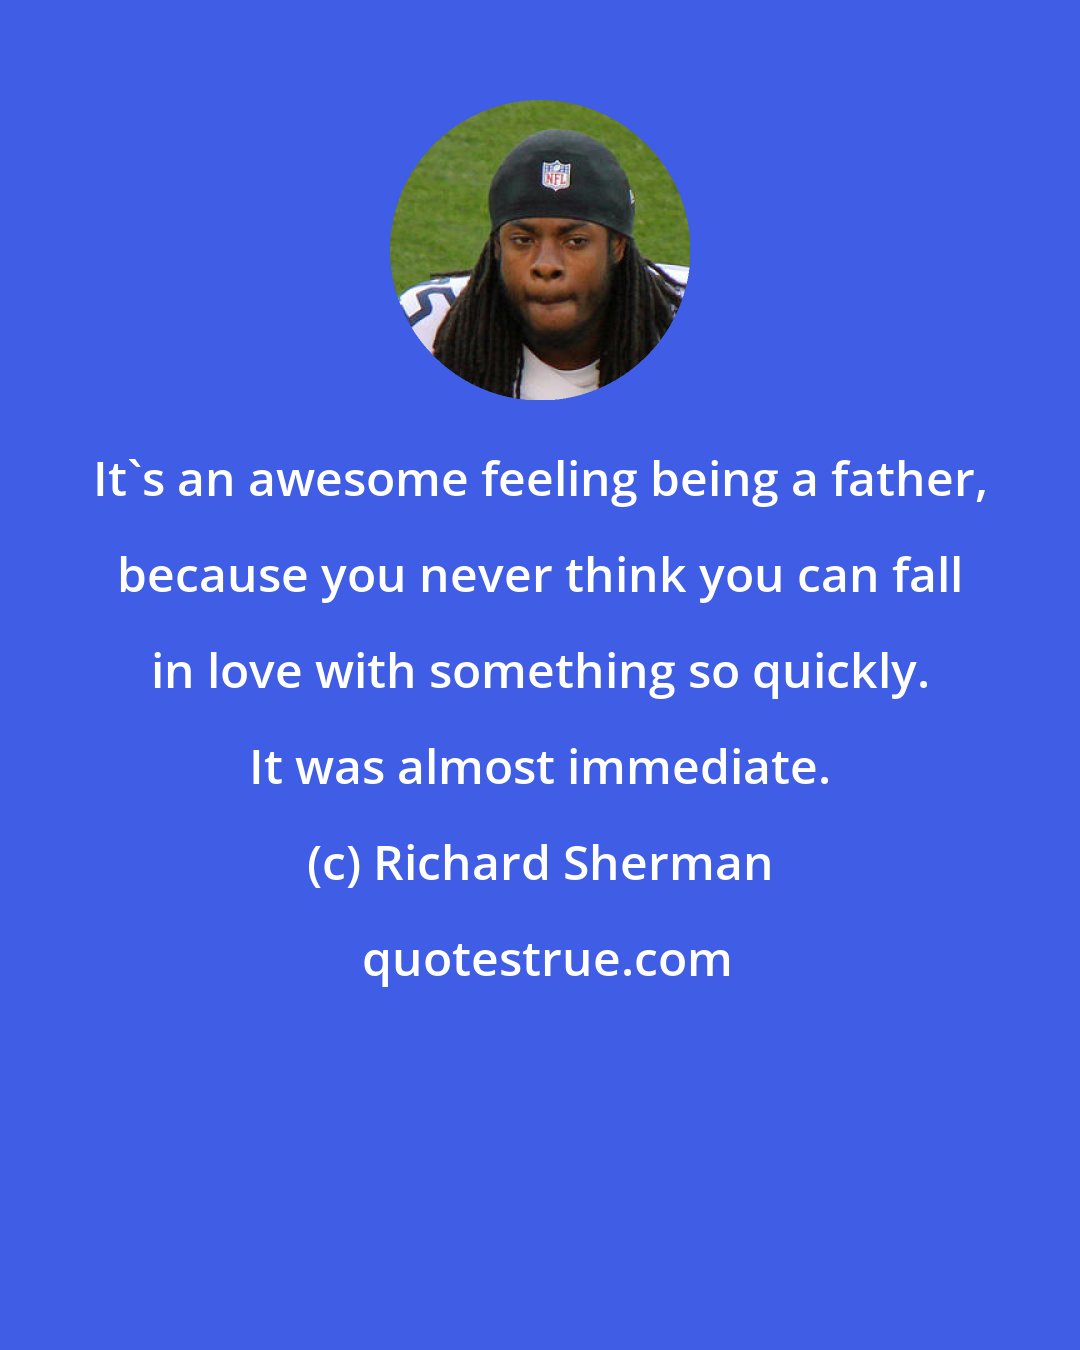 Richard Sherman: It's an awesome feeling being a father, because you never think you can fall in love with something so quickly. It was almost immediate.